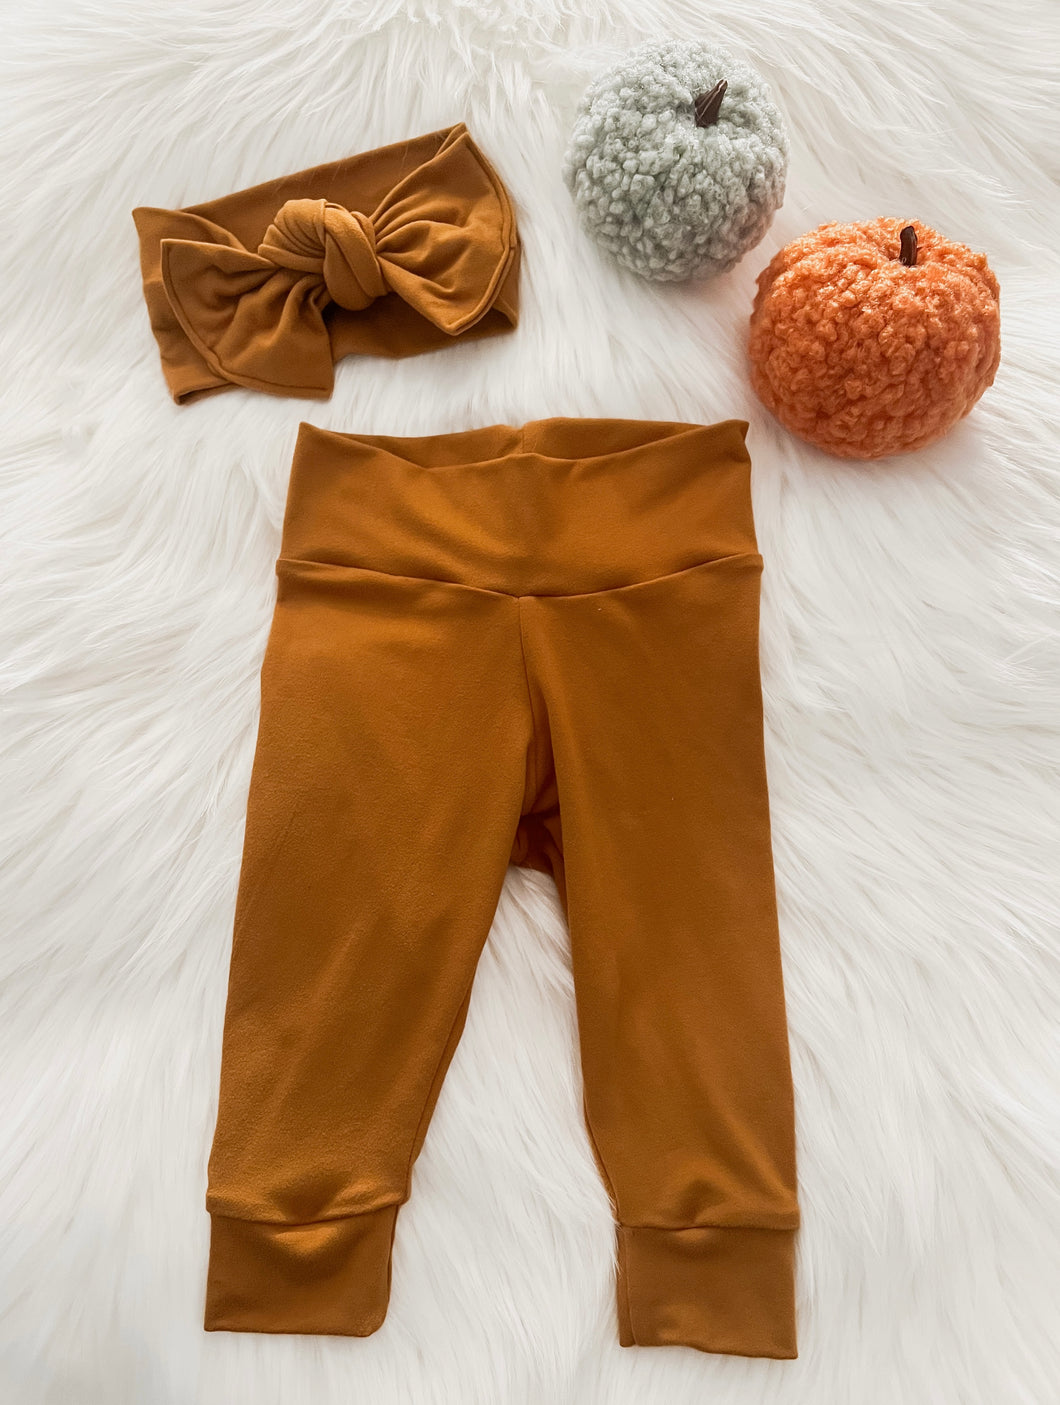 Baby Leggings in Mustard with Bow Headband Outfit